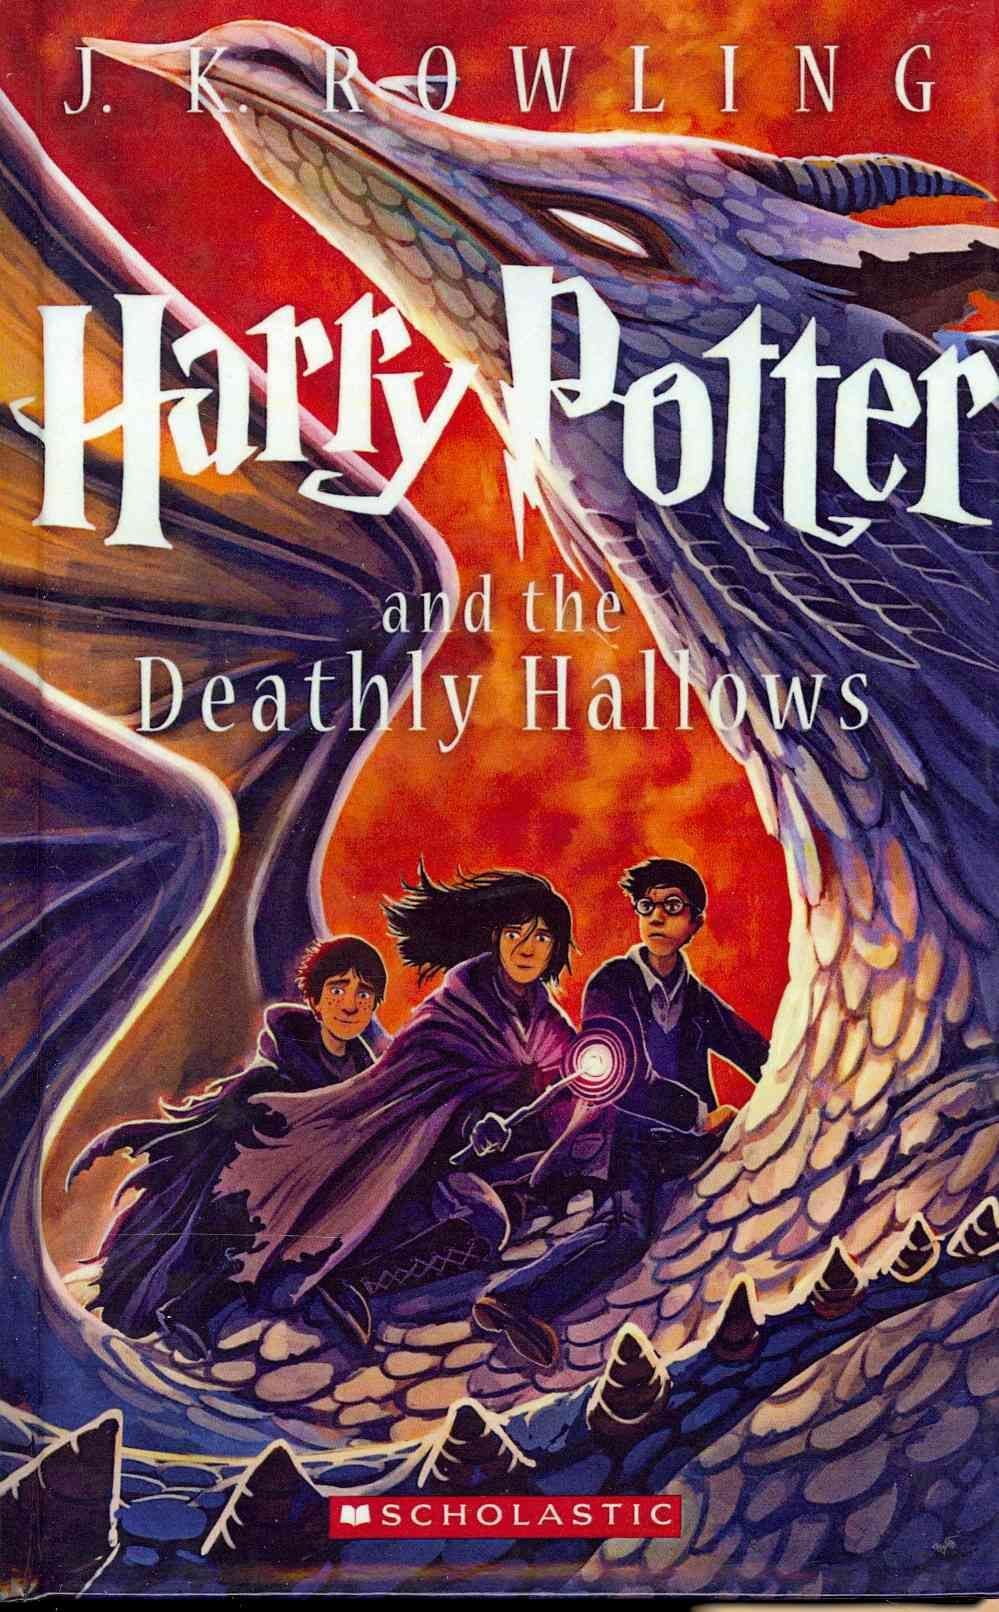 The Rowling Library on X: Harry Potter and the Deathly Hallows